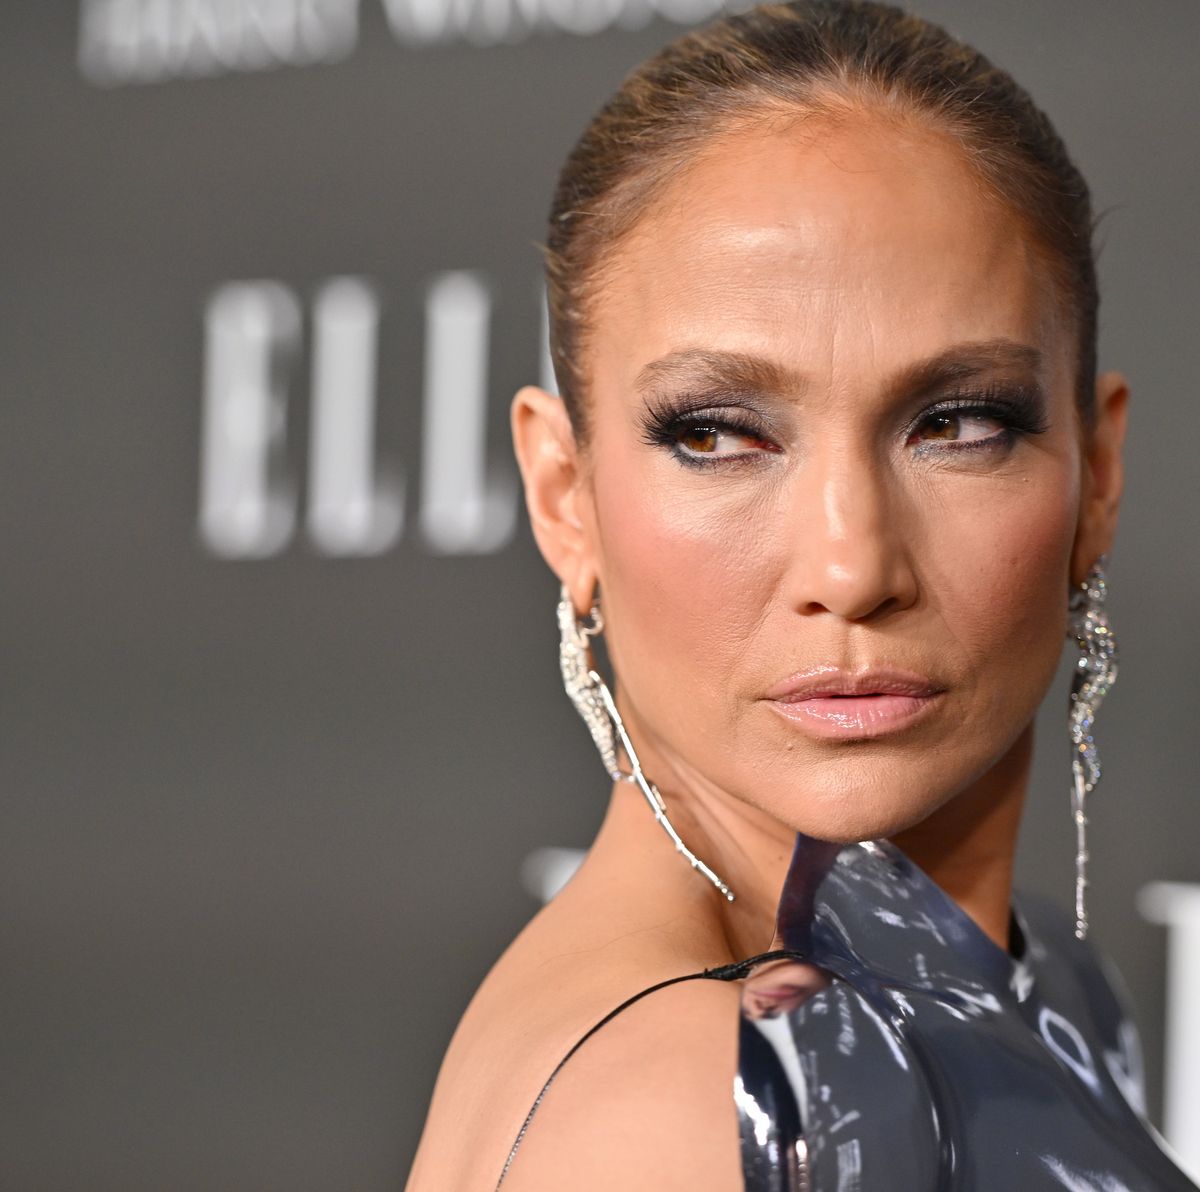 JLo wears a silver breastplate that flashes major underboob